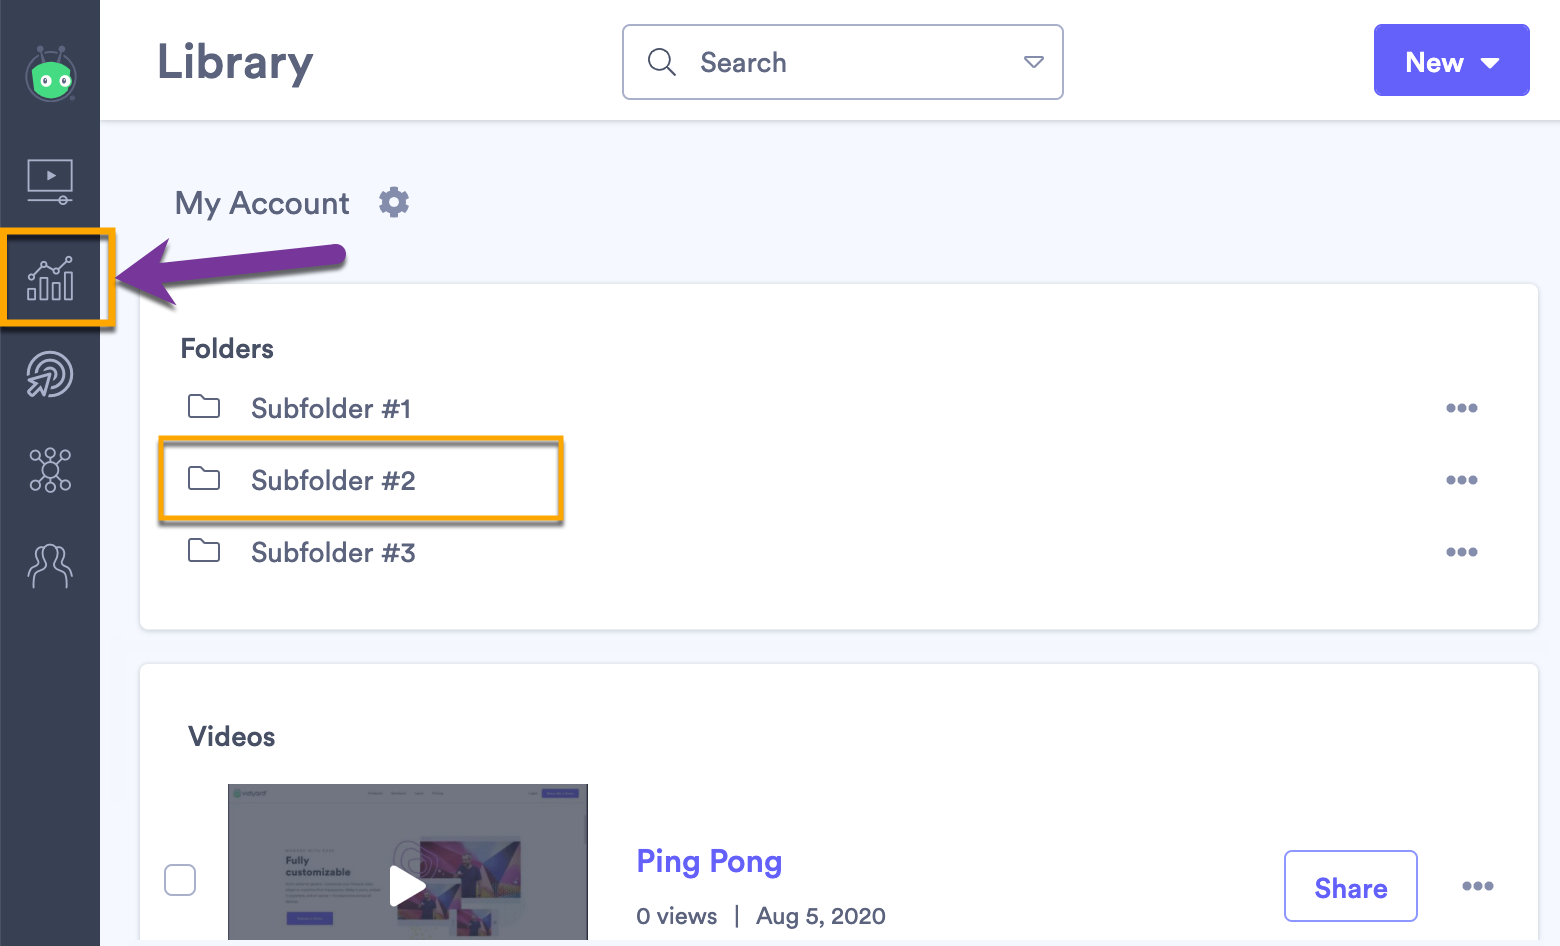 Navigating to a different folder in your account to access a different view of video analytics